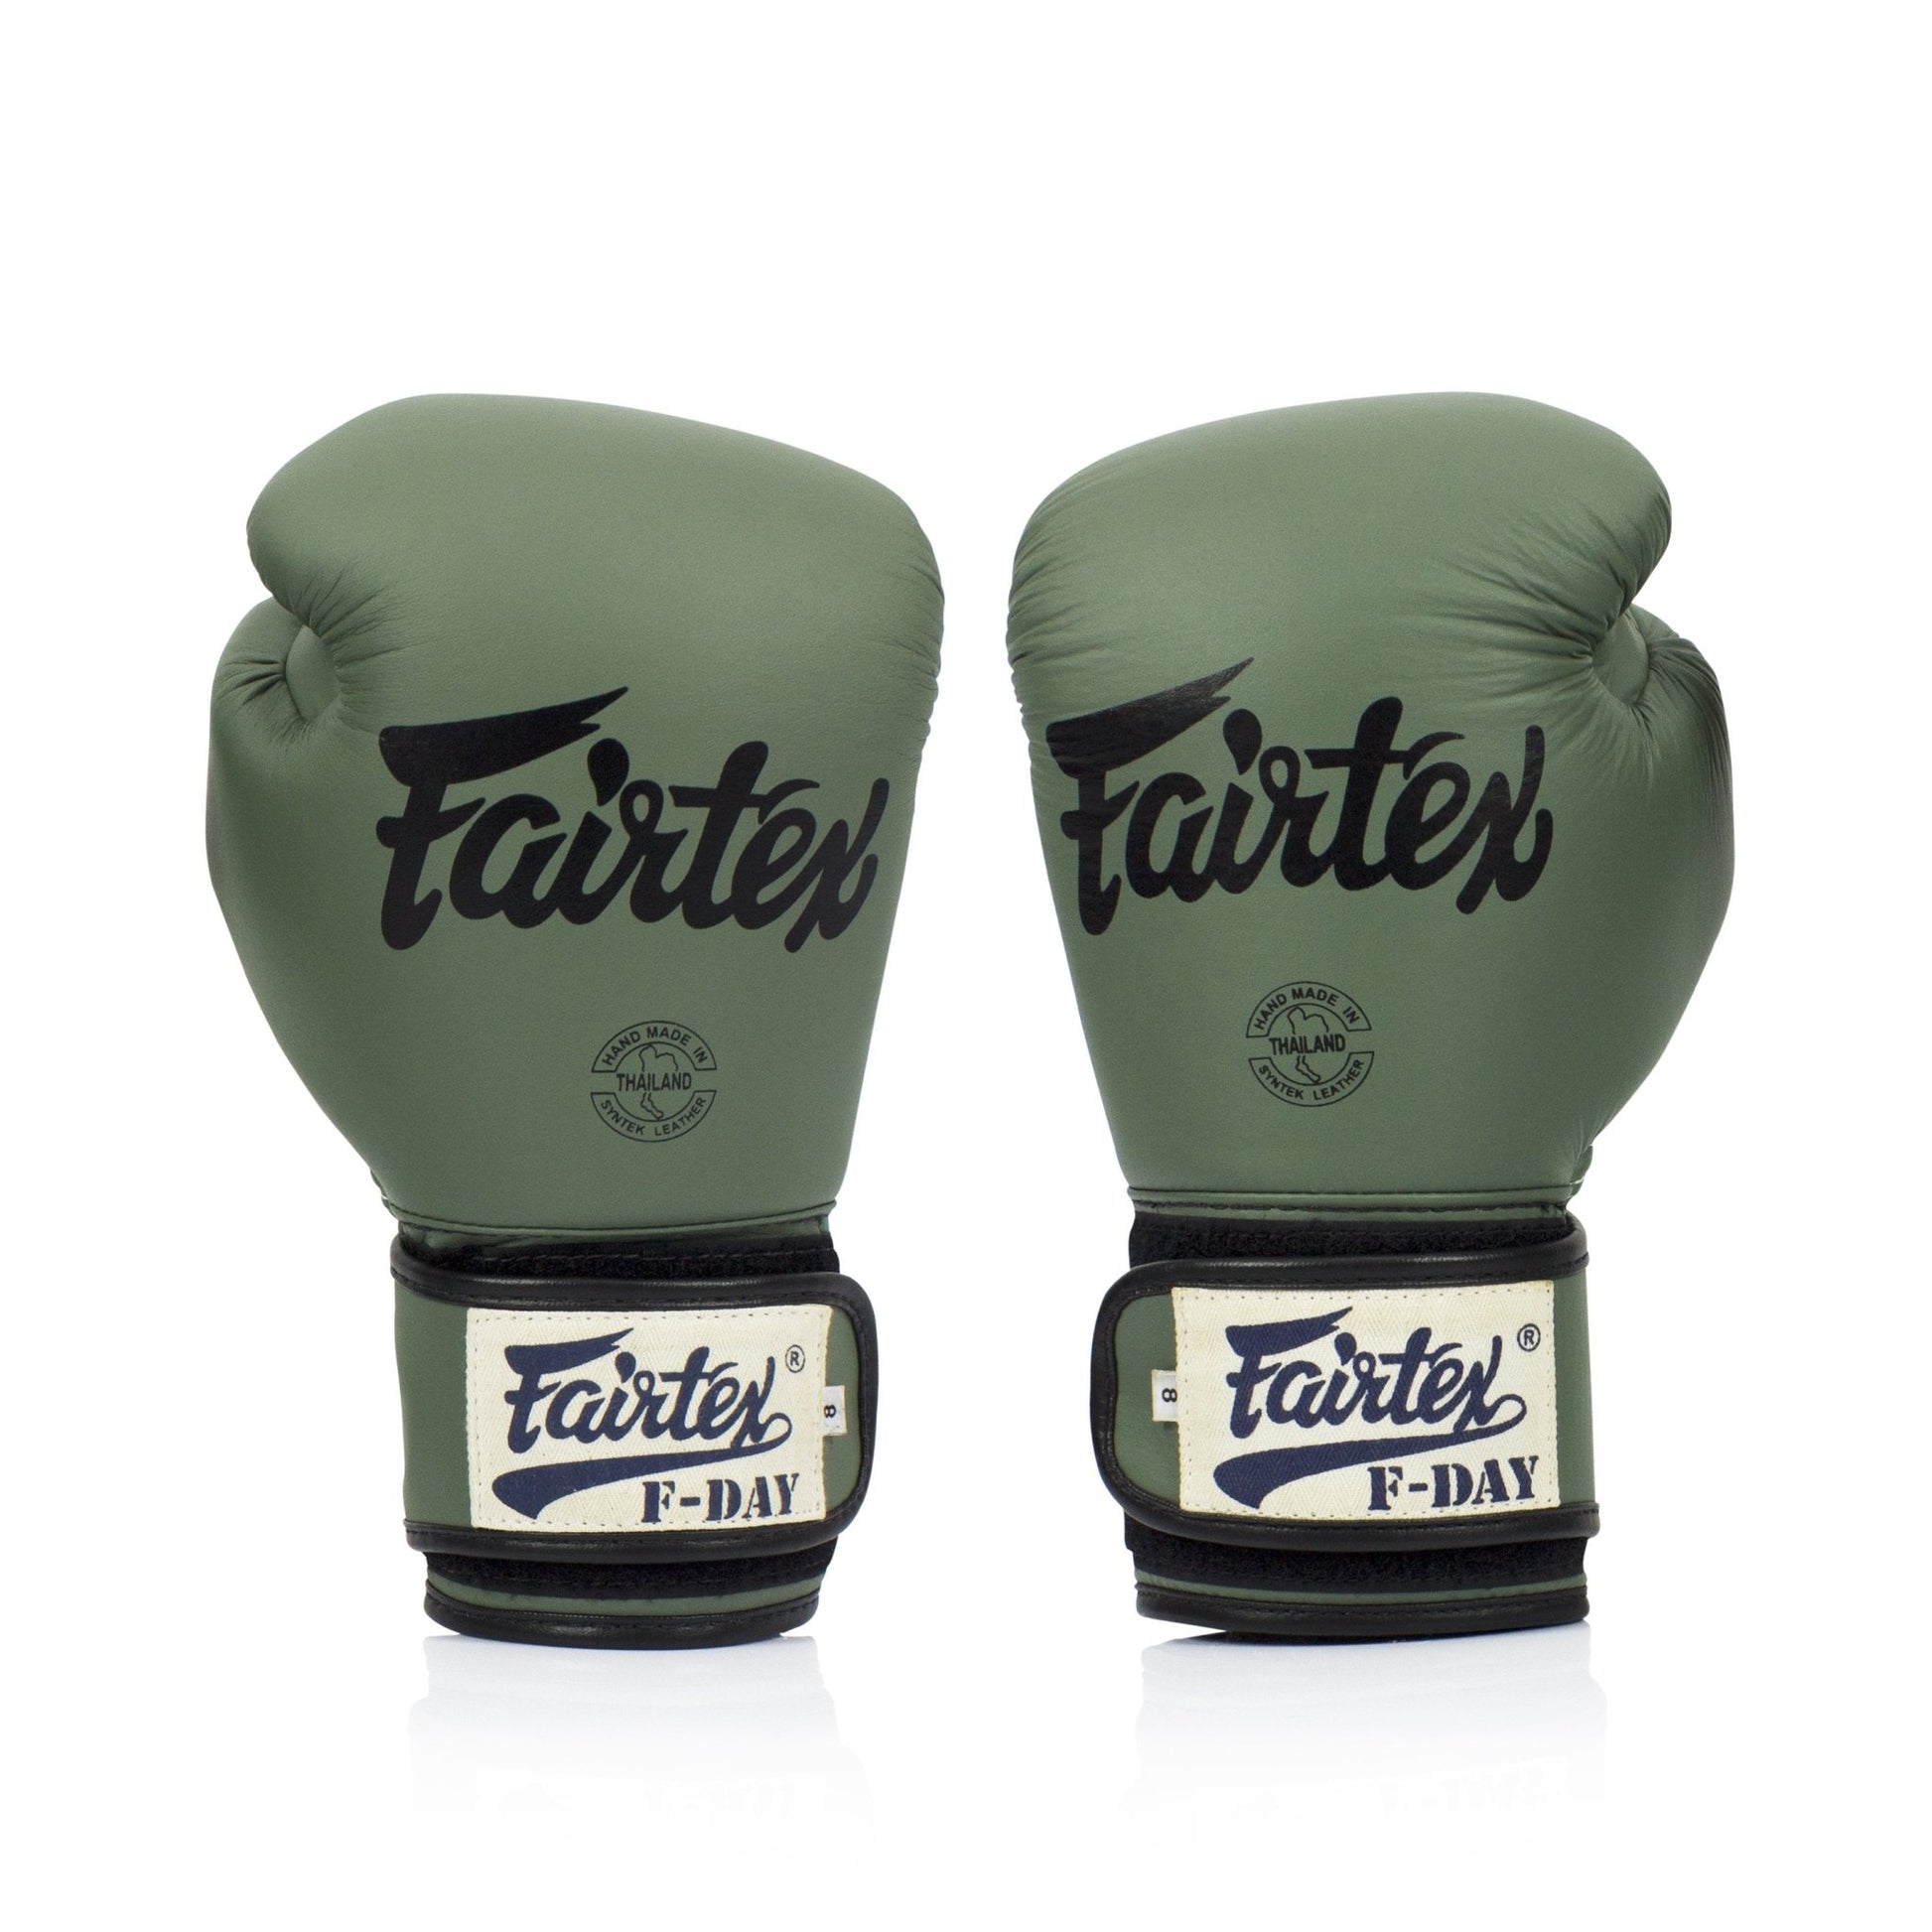 Fairtex Boxing Gloves BGV11 "Father's Day" Limited Edition Gloves without box